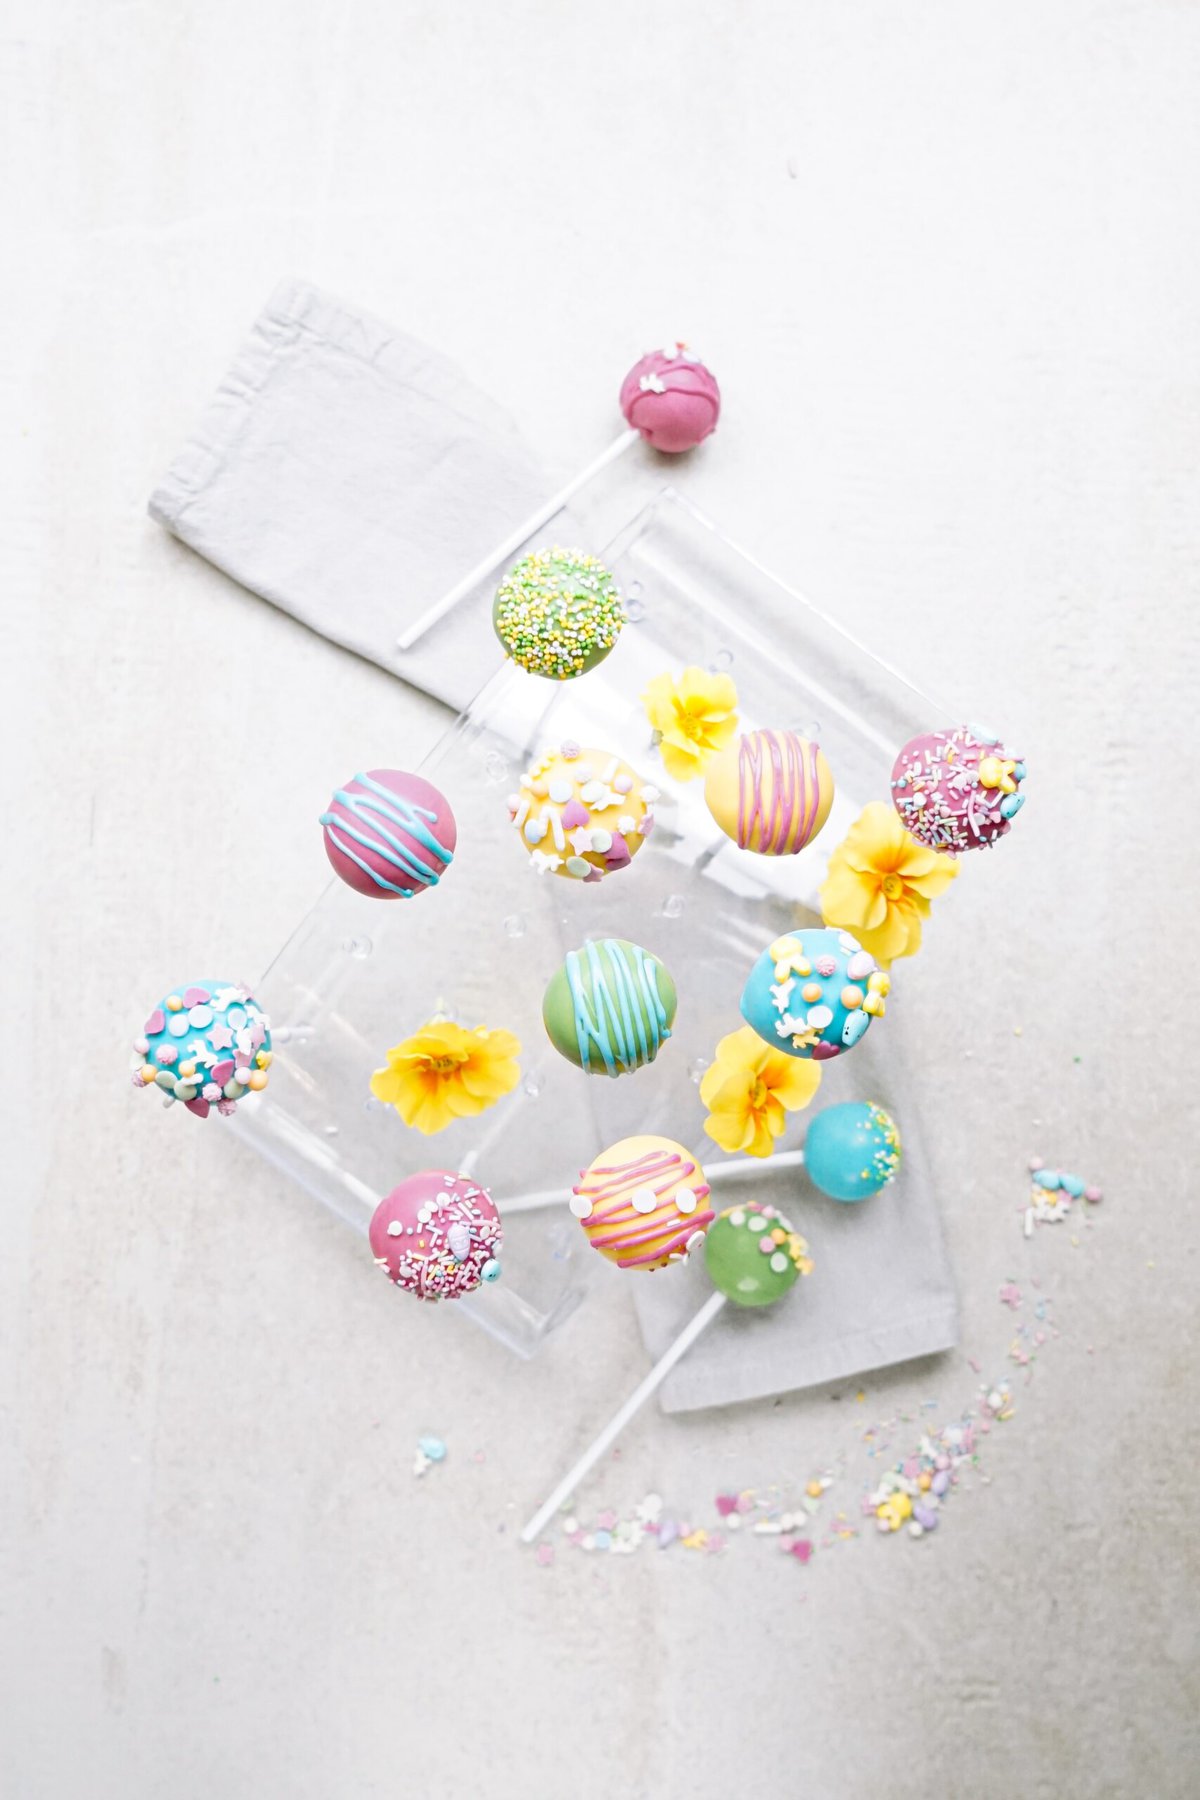 Assorted colorful cake pops with flower decorations and sprinkles on a light background.